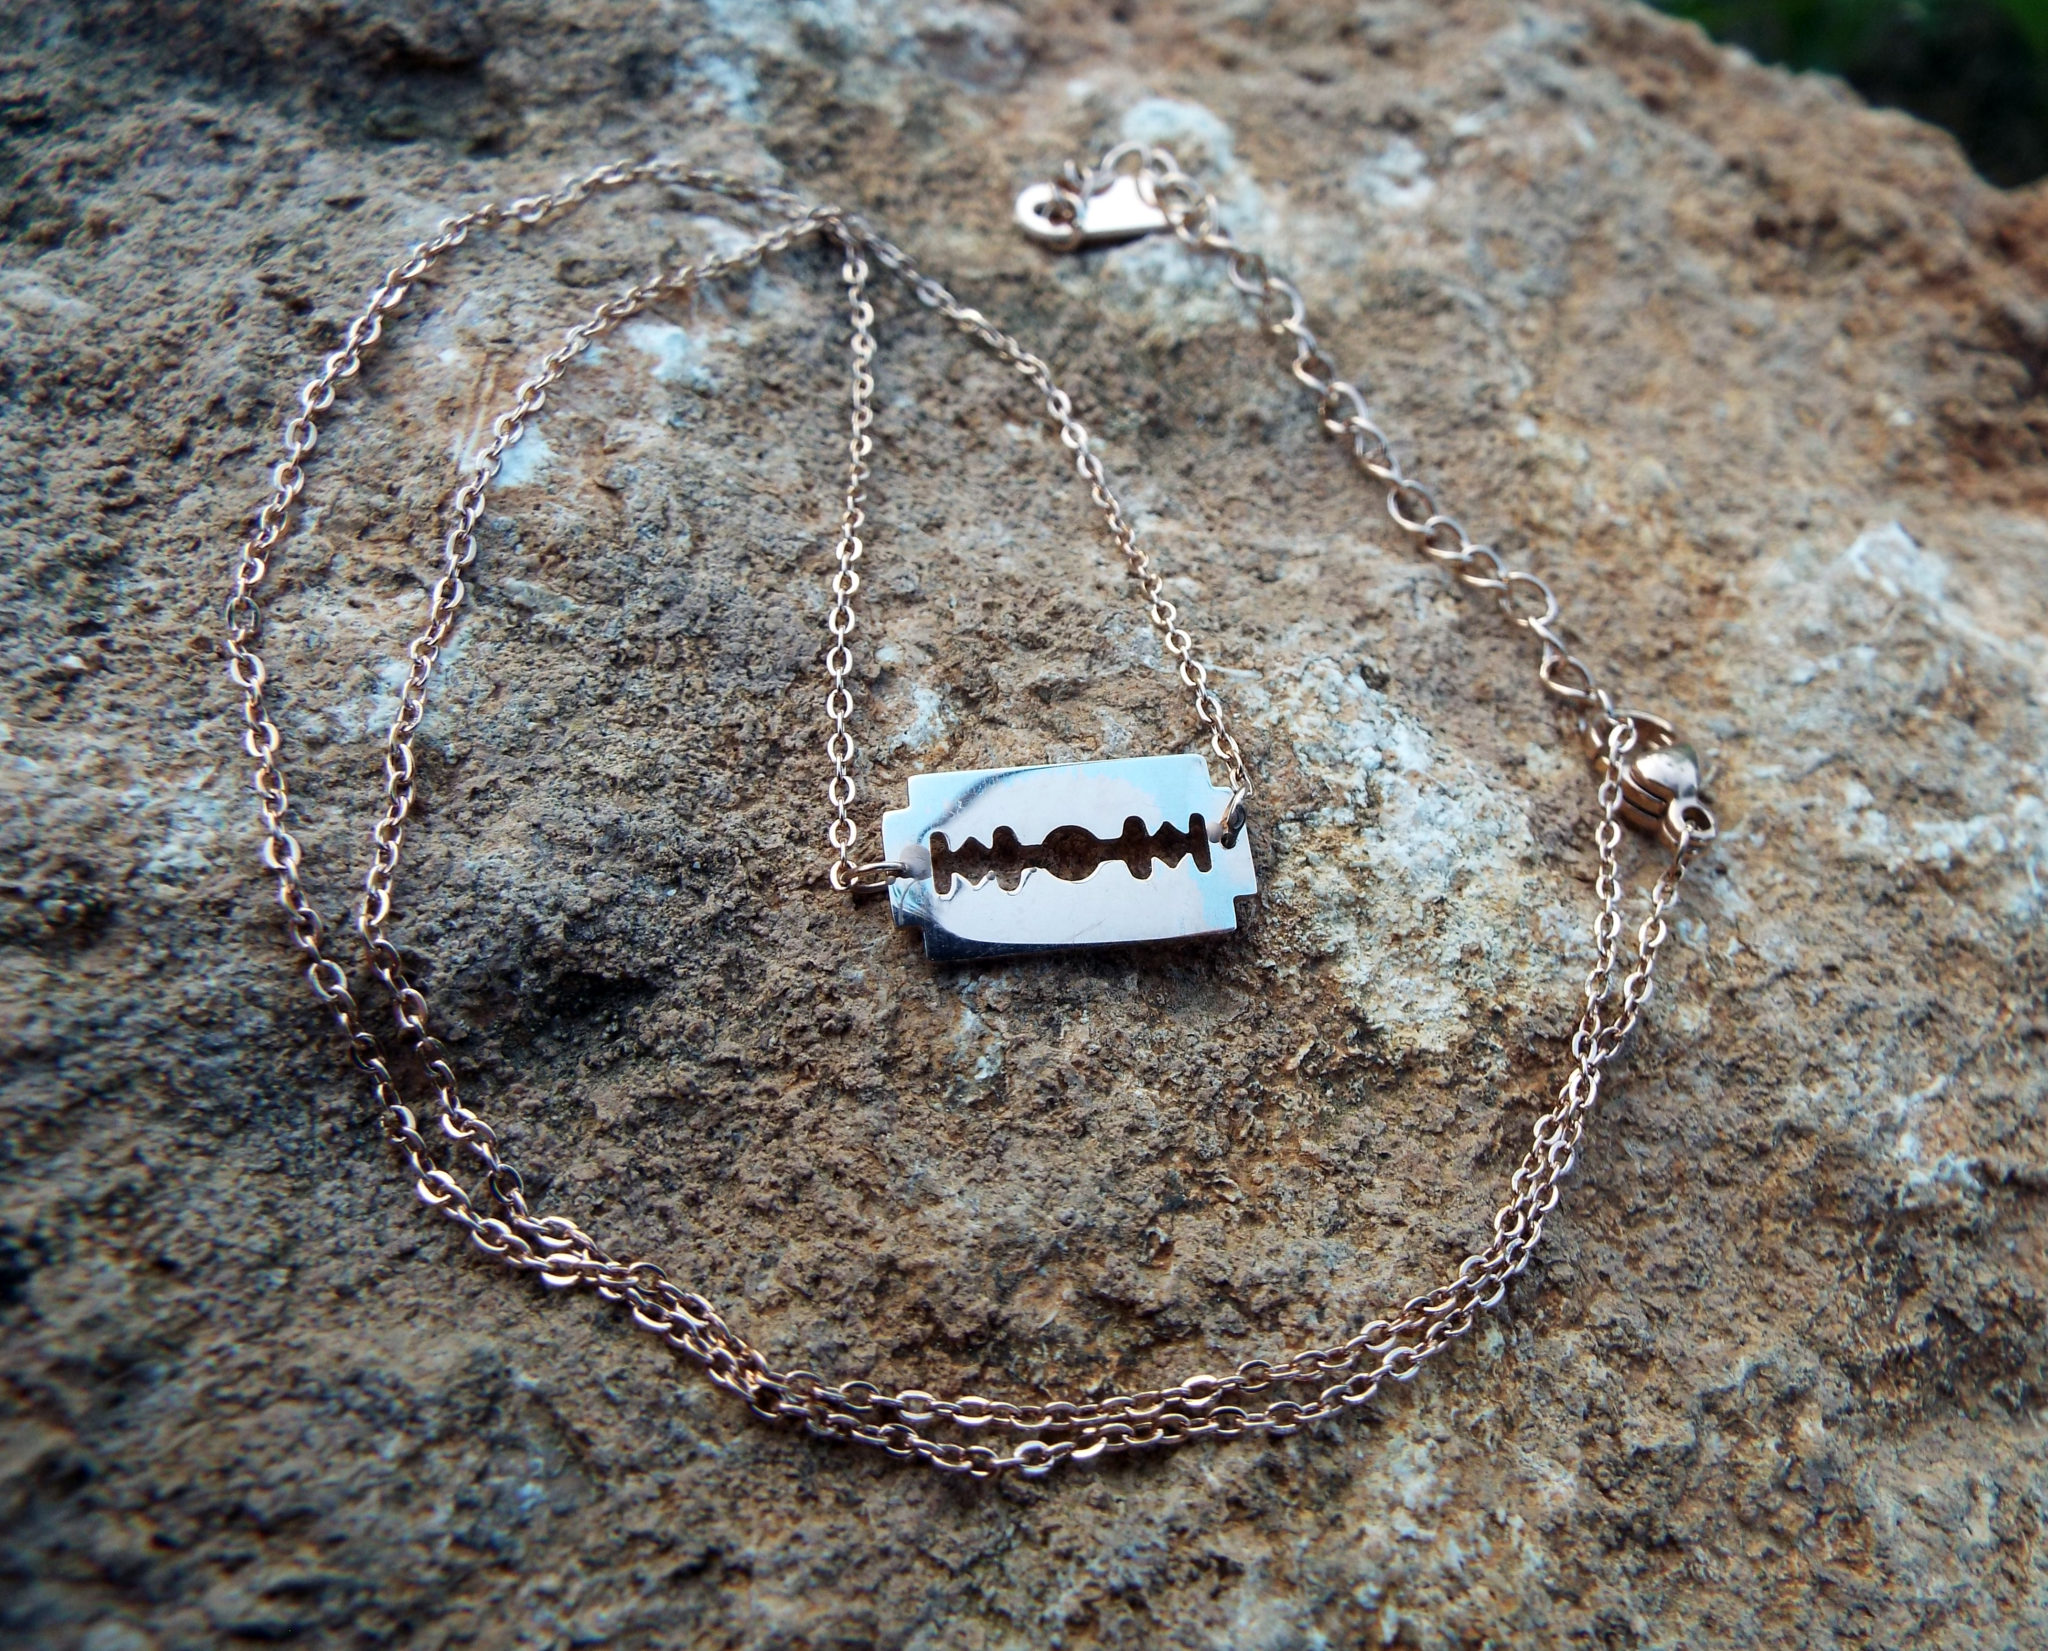 Rose Gold Stainless Steel Razor Blade Necklace Handmade Jewelry